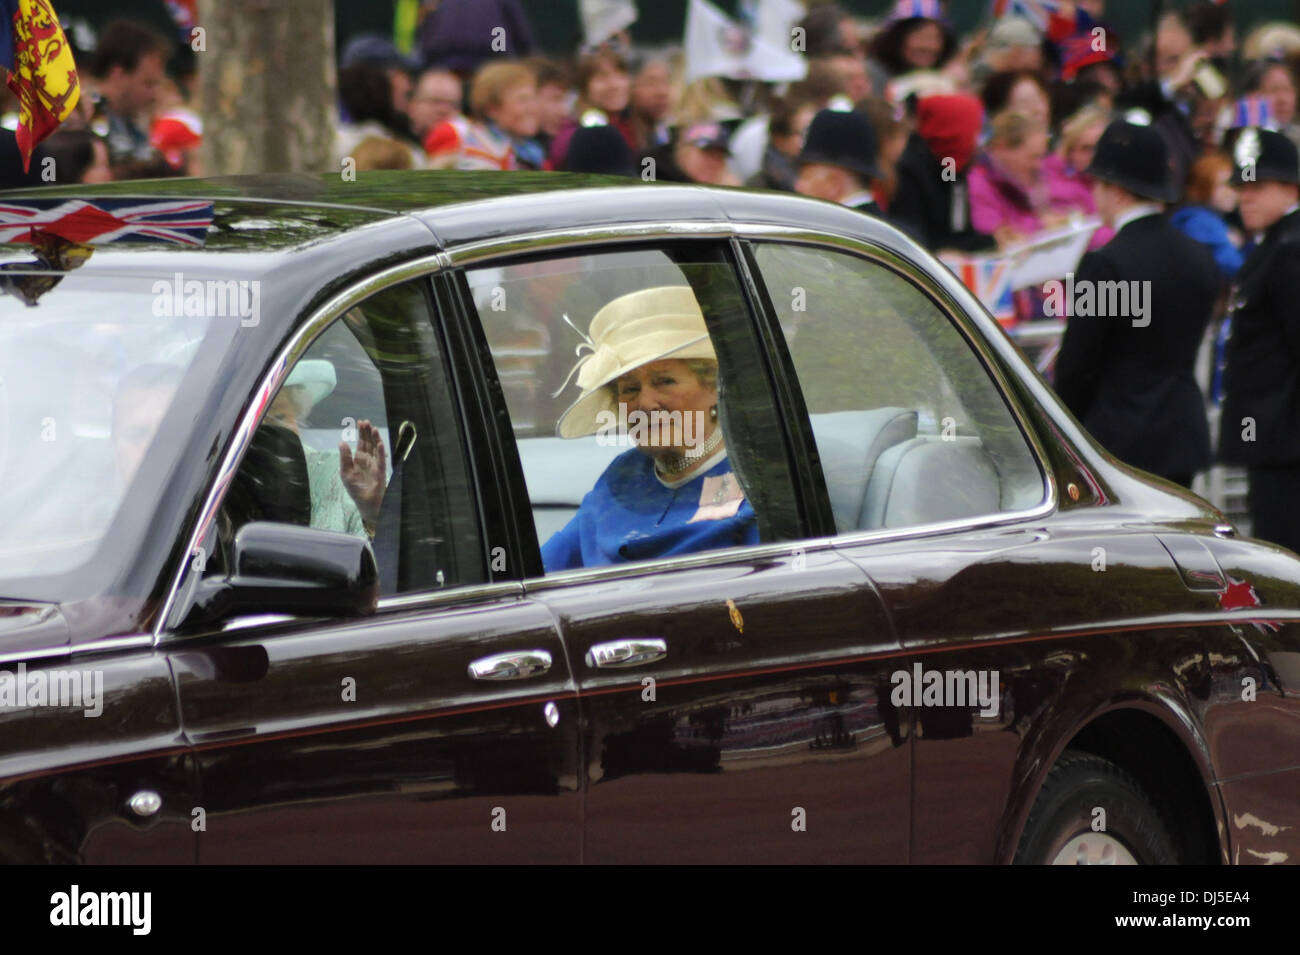 Diana Marion, The Lady Farnham, in place of the Duke of Edinburgh, on route to the Queen's Diamond Jubilee thanksgiving service at St. Paul's Cathedral London, England - 05.06.12 Stock Photo